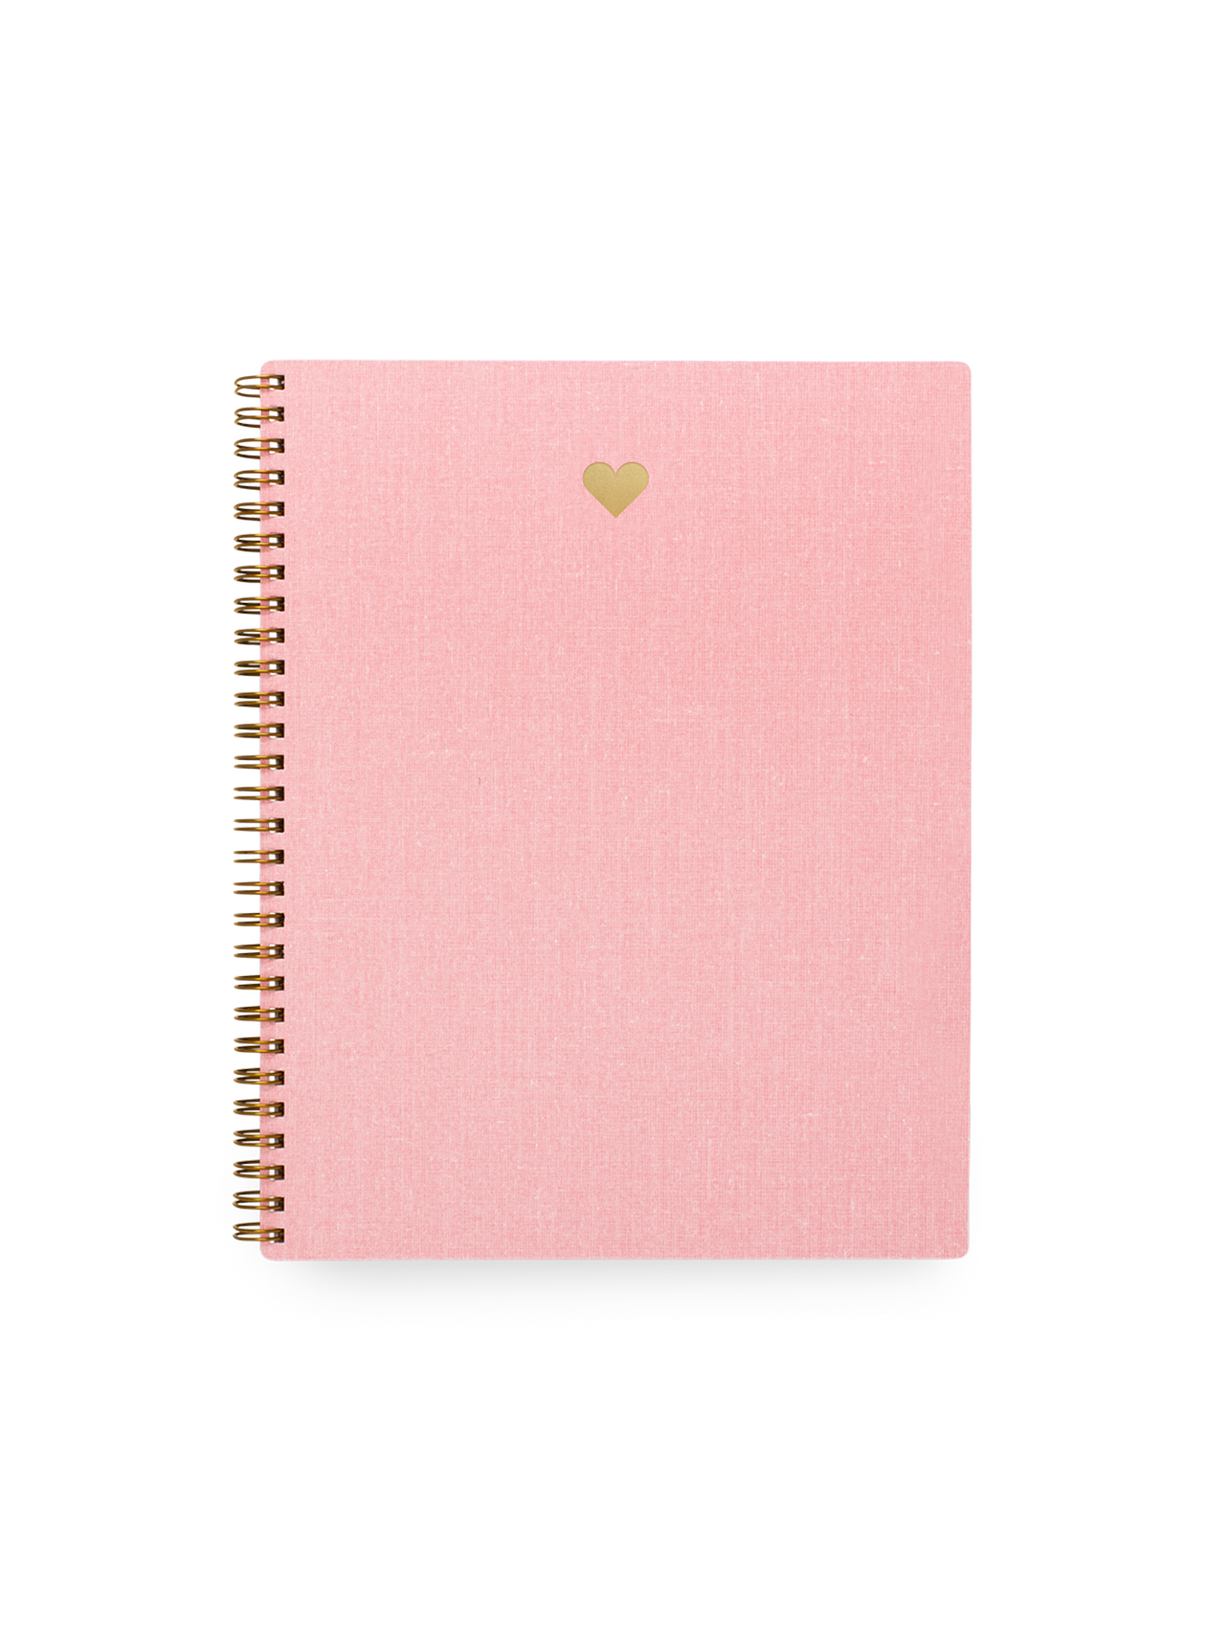 The Appointed Heart Notebook in Blossom Pink bookcloth with a gold foil heart signet and brass wire-o binding || Blossom Pink